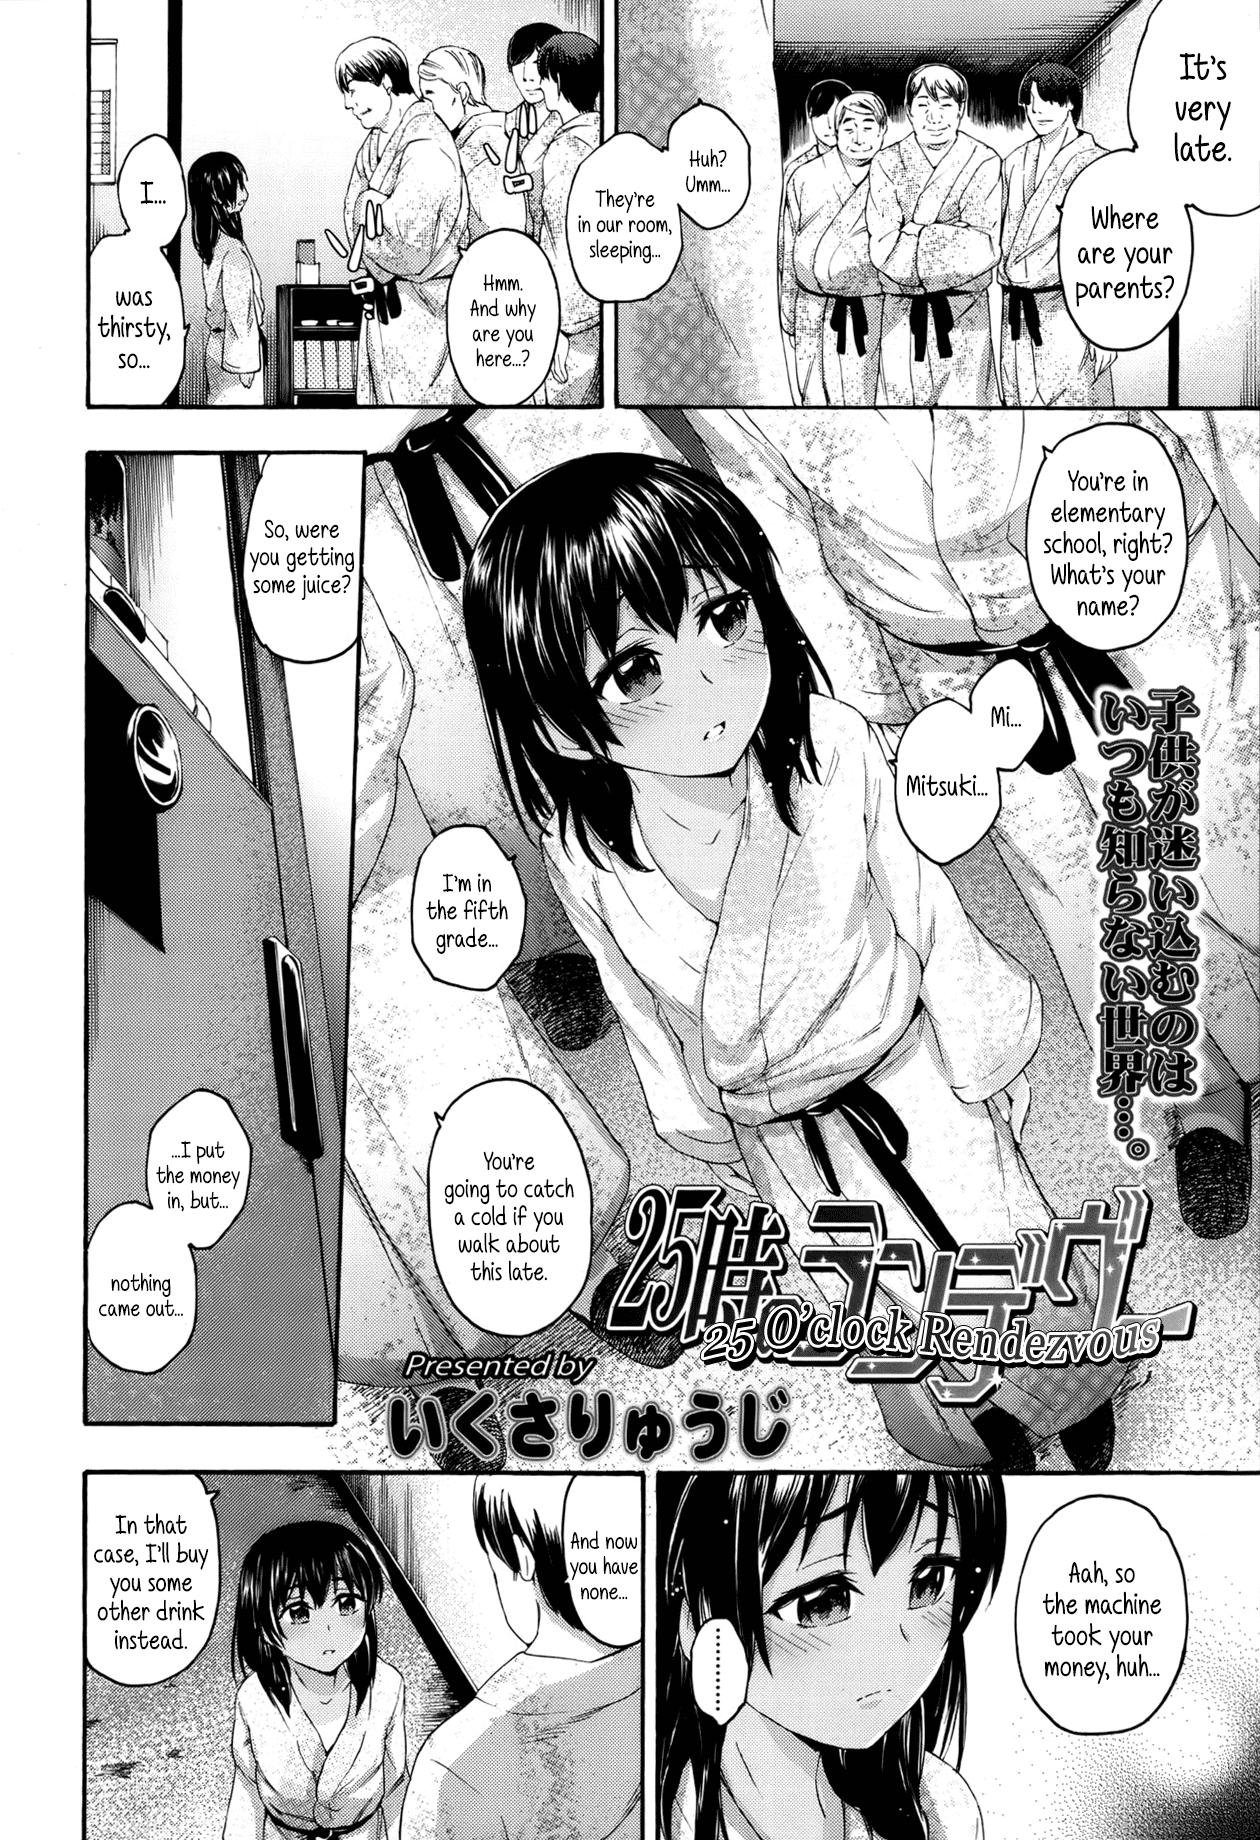 Cut 25 O'clock Rendezvous Compilation - Page 2